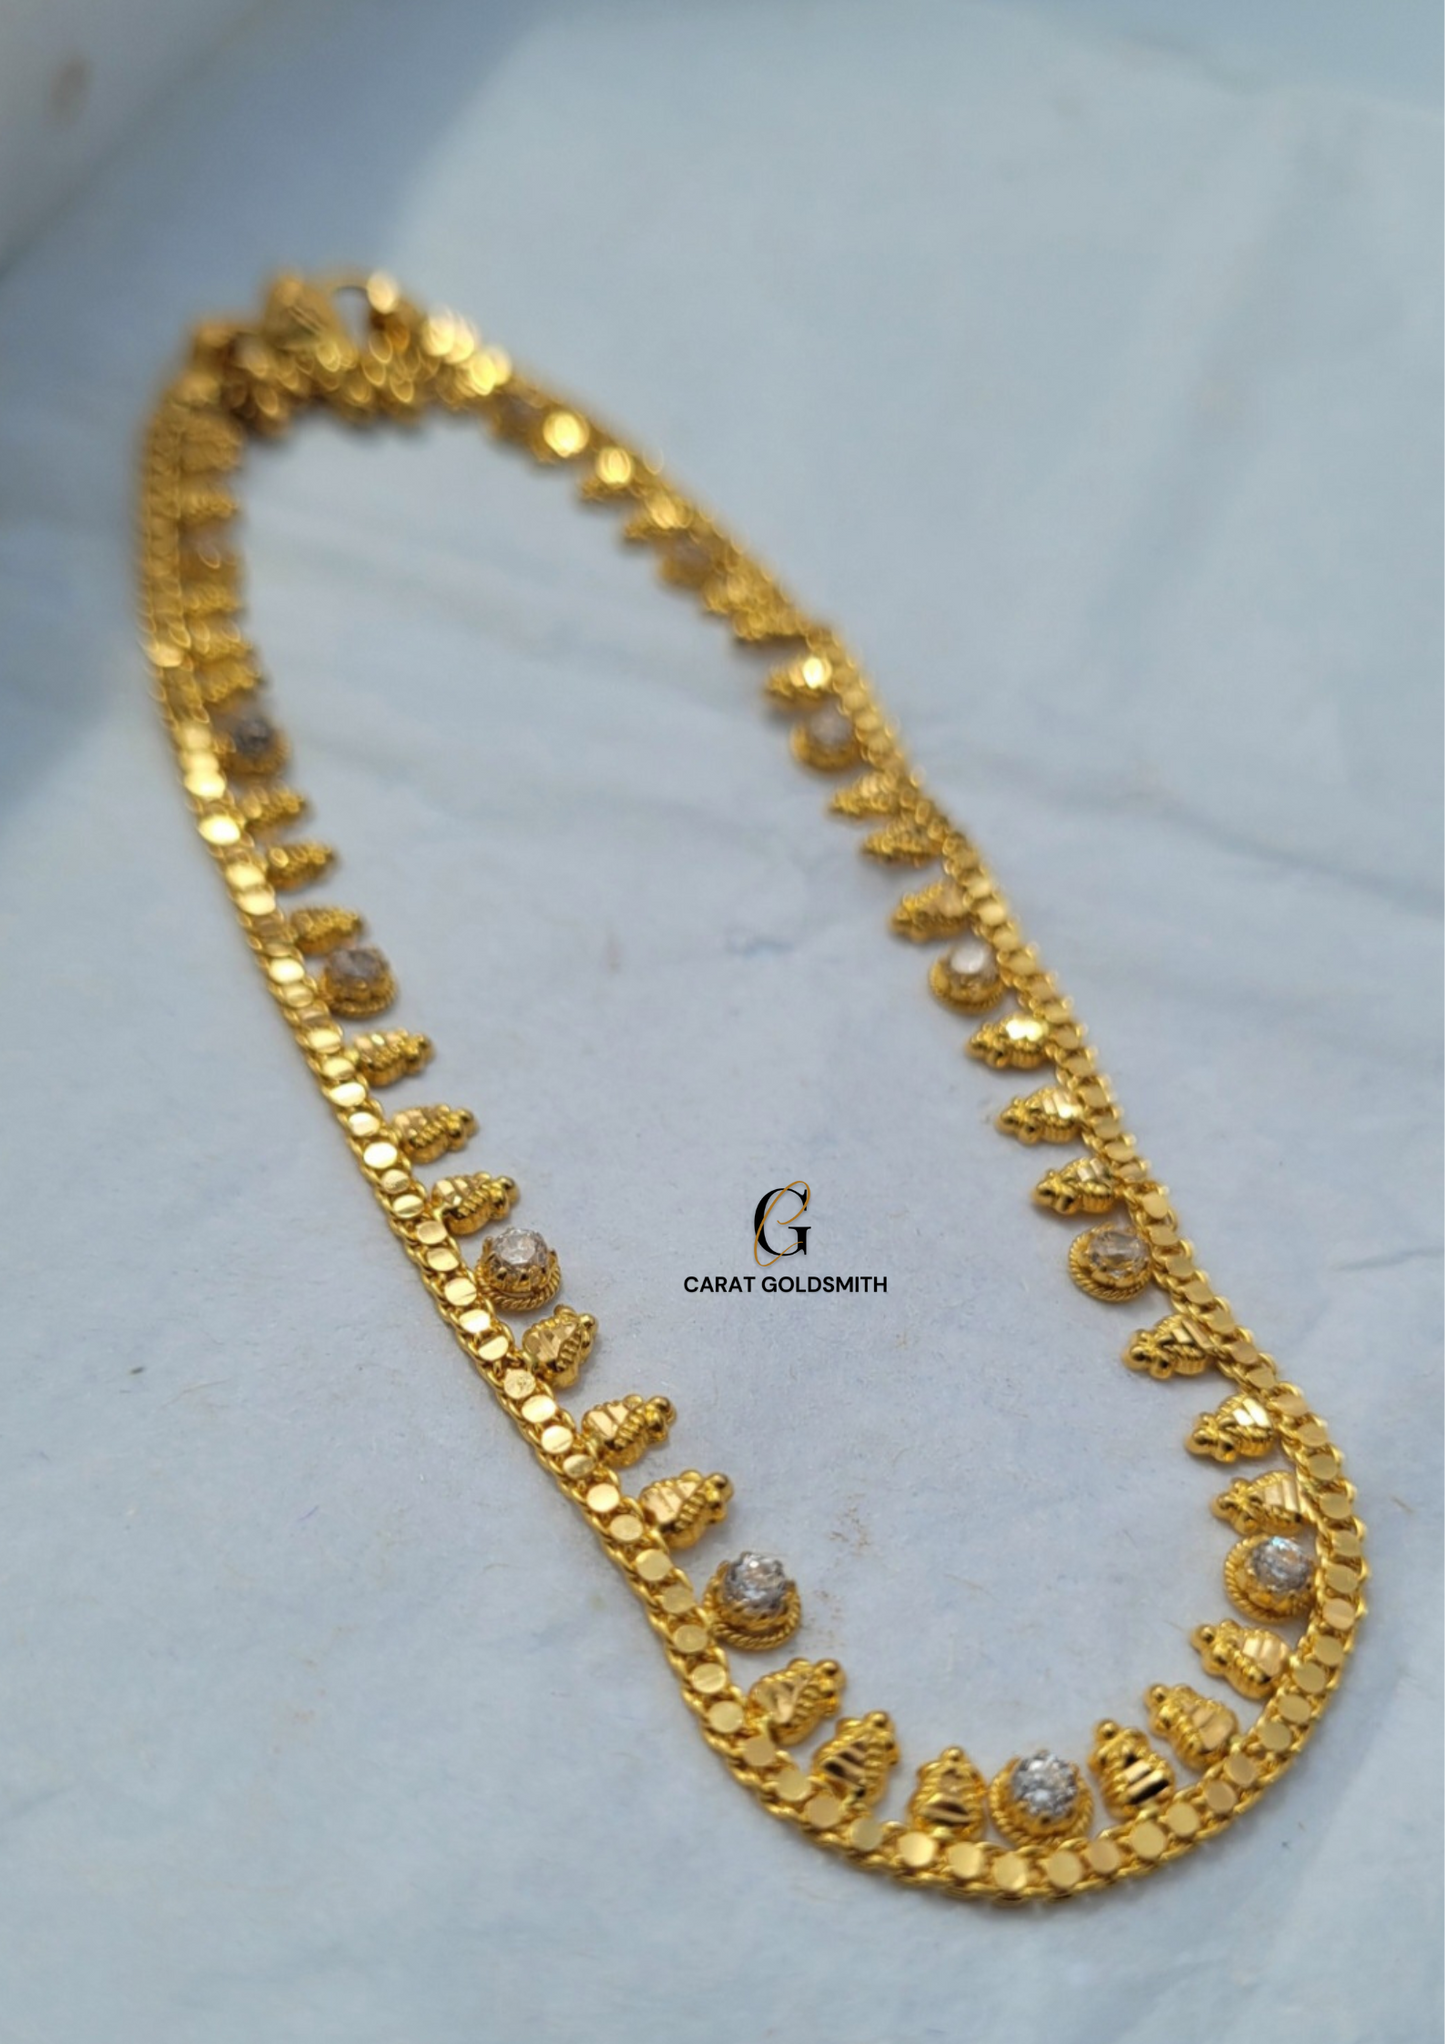 CUBIC ZIRCONIA AND GOLD ANKLET WITH CHARM